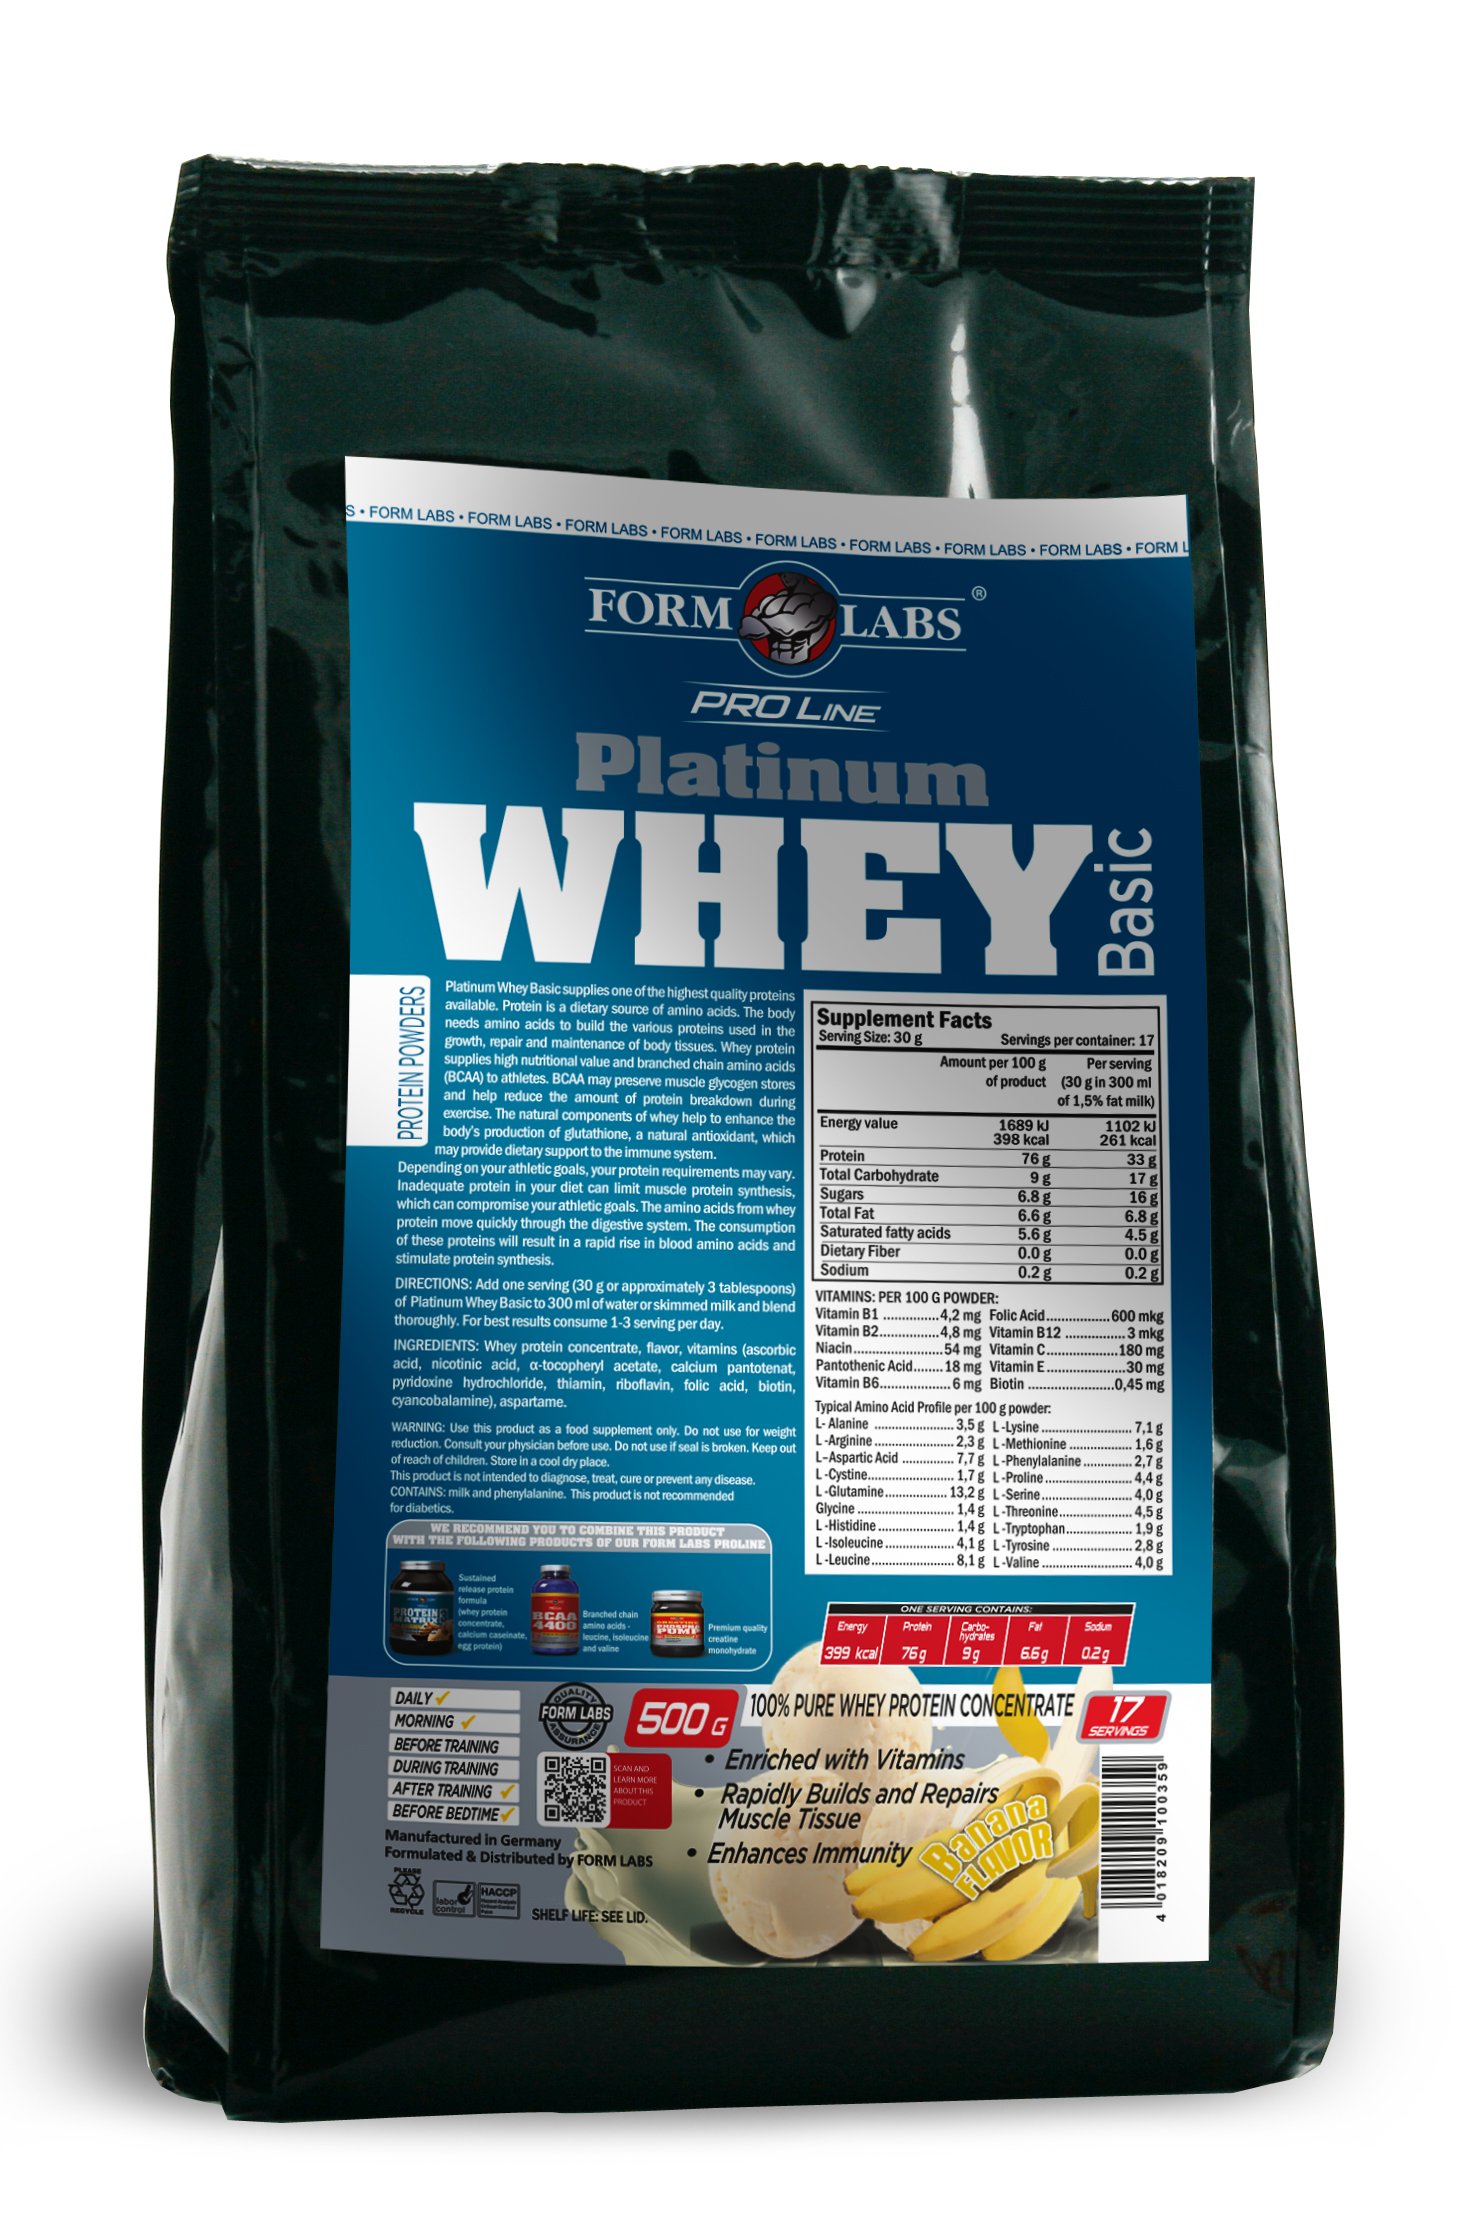 Platinum Whey Basic, 500 g, Form Labs. Whey Concentrate. Mass Gain recovery Anti-catabolic properties 